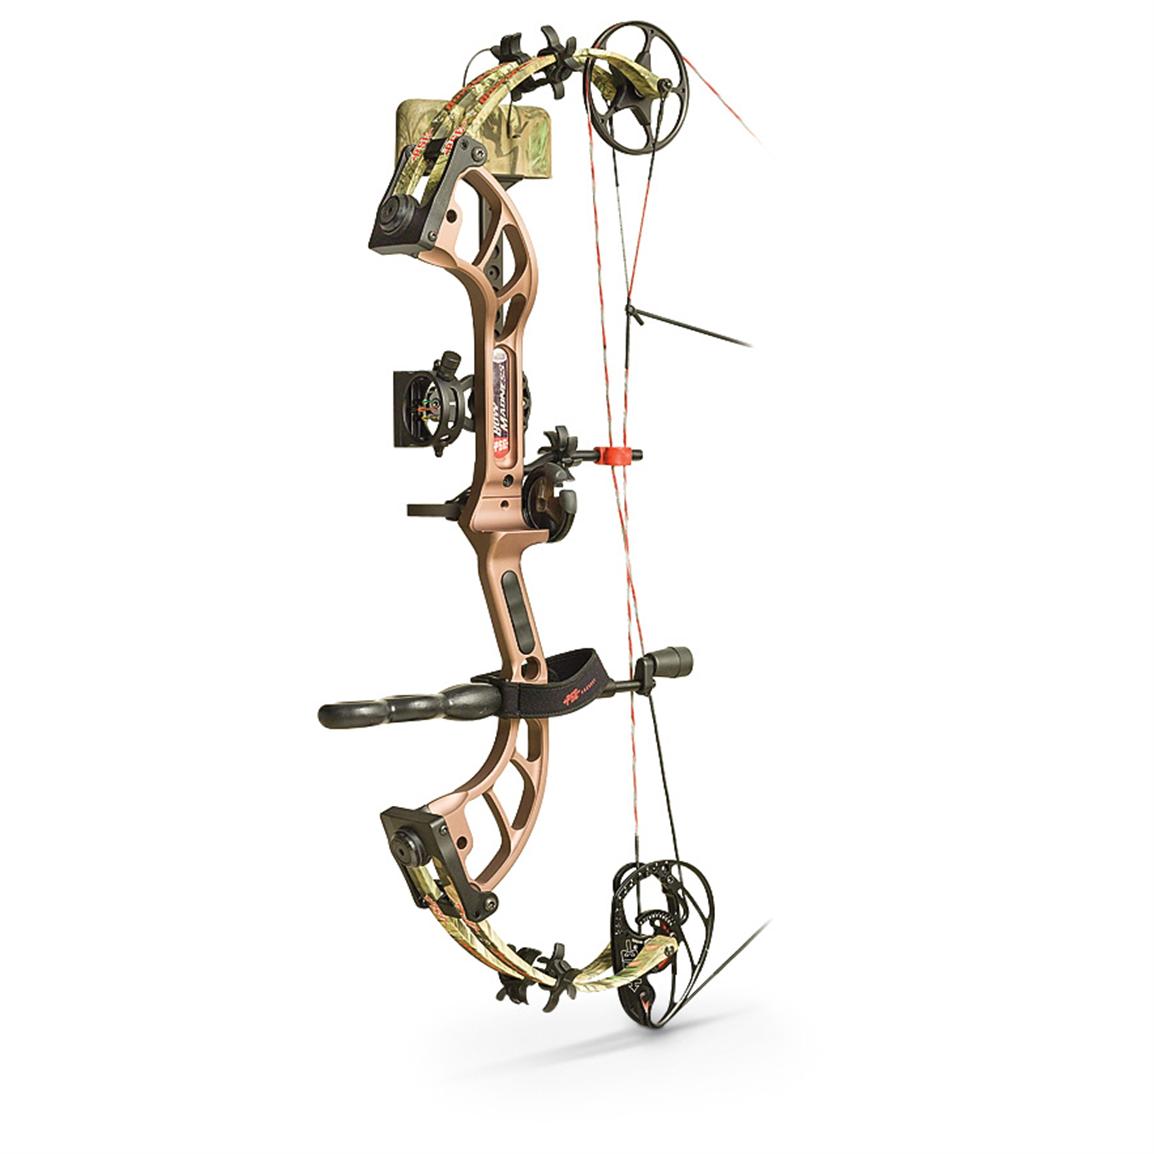 Hoyt bow serial number lookup